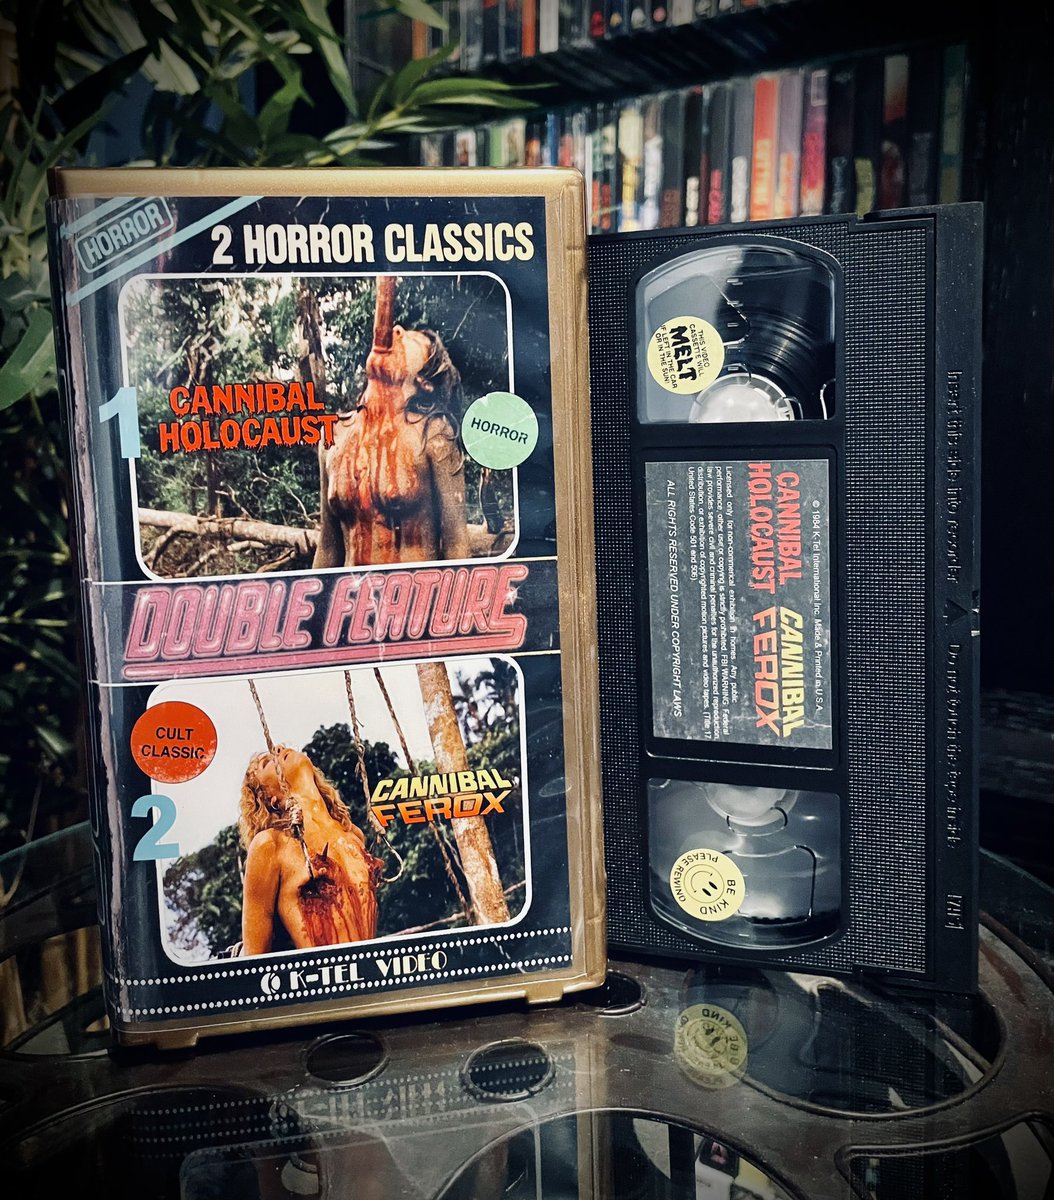 Who loves custom VHS? Threw this together, ended up turning into more of a gonzo cannibal gut munching mix tape than anything (w/ trailers, etc.), but I’m proud of it. #CannibalHolocaust #CannibalFerox #VHS